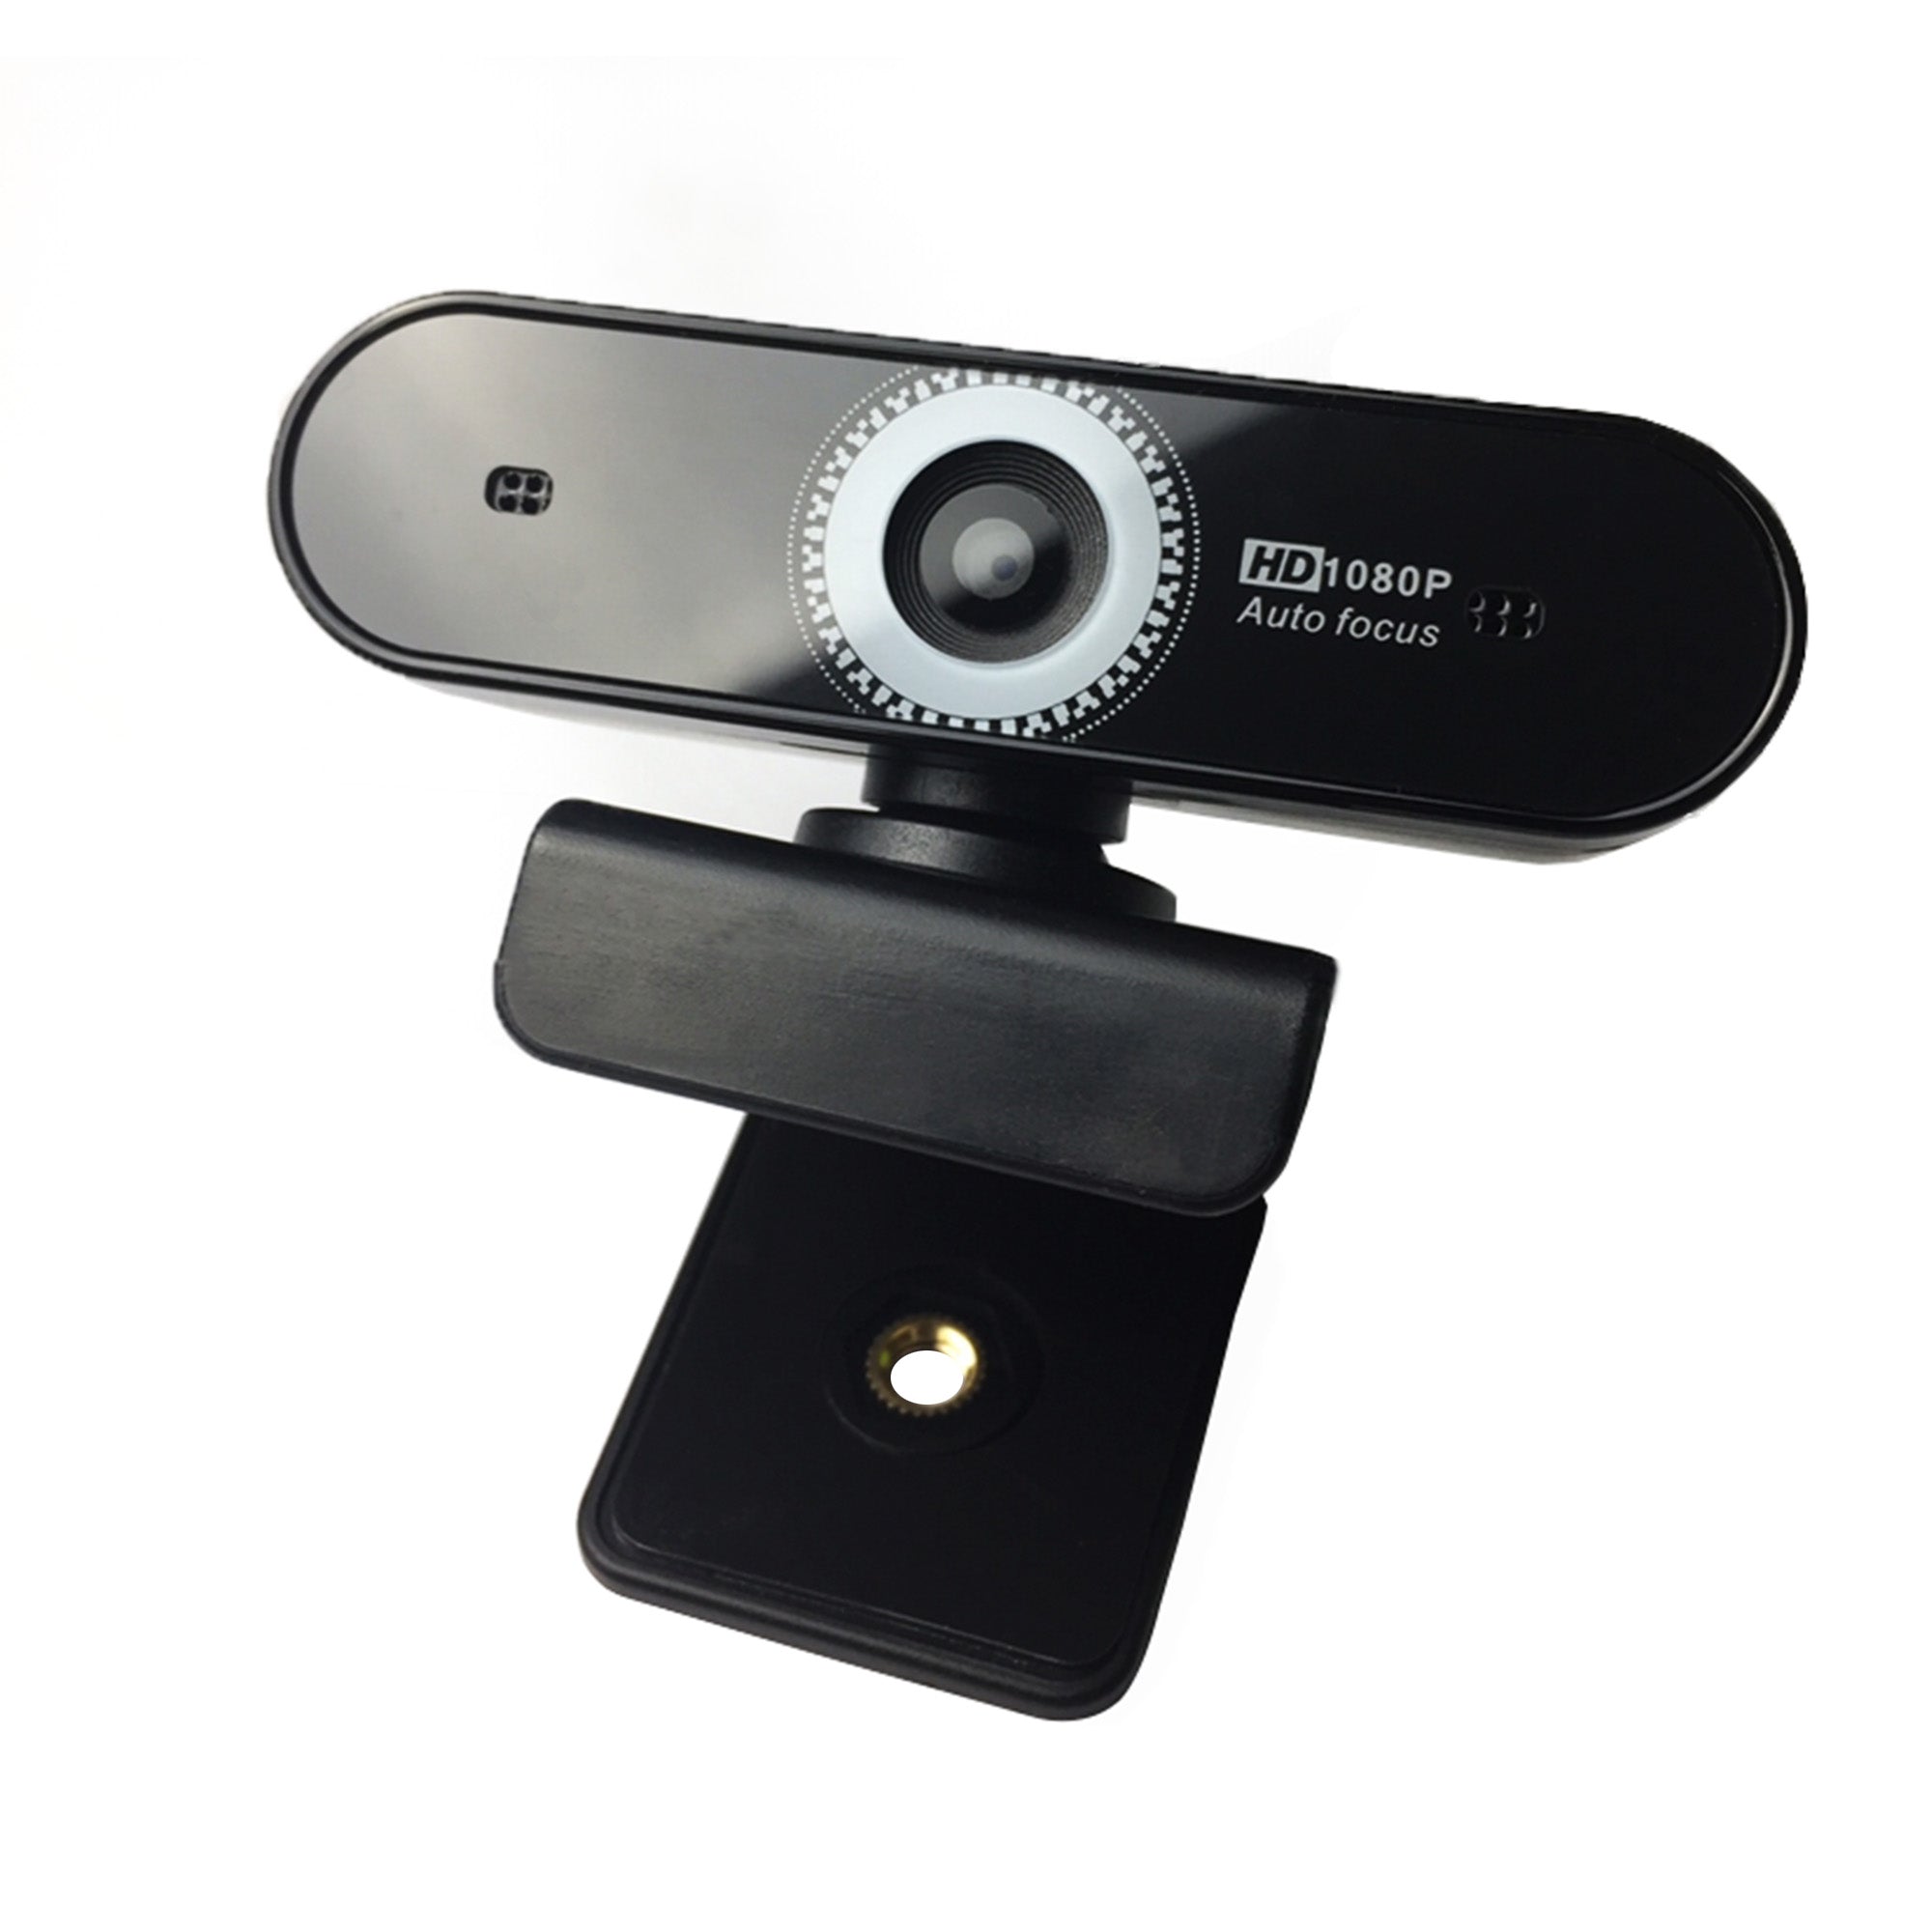 Azulle Webcam Enjoy Smoother Content, Accessory